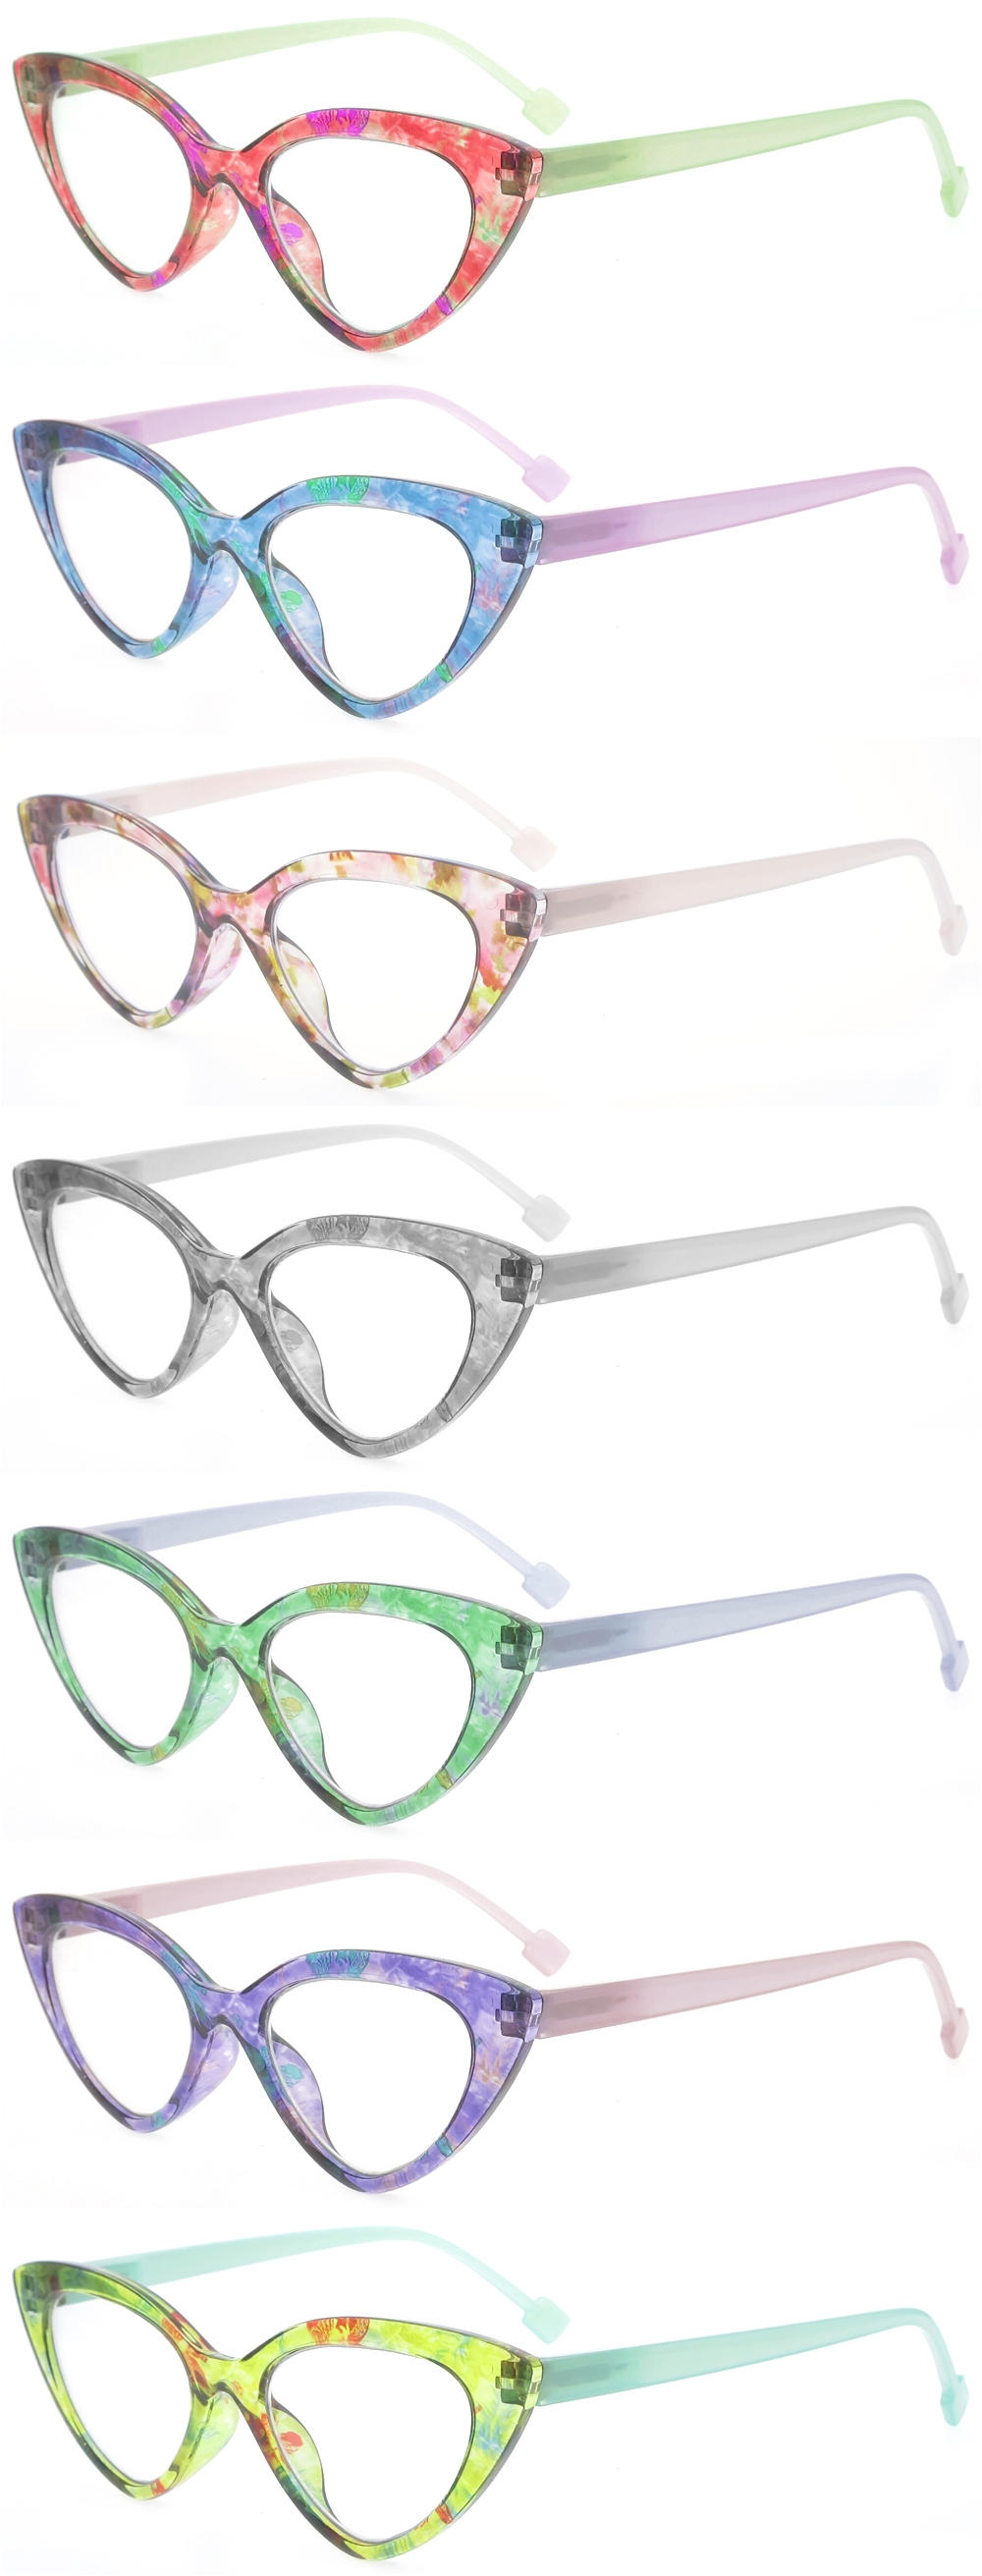 Dachuan Optical DRP131126 China Wholesale Trendy Colorful Plastic Reading Glasses with Cateye Shape (2)